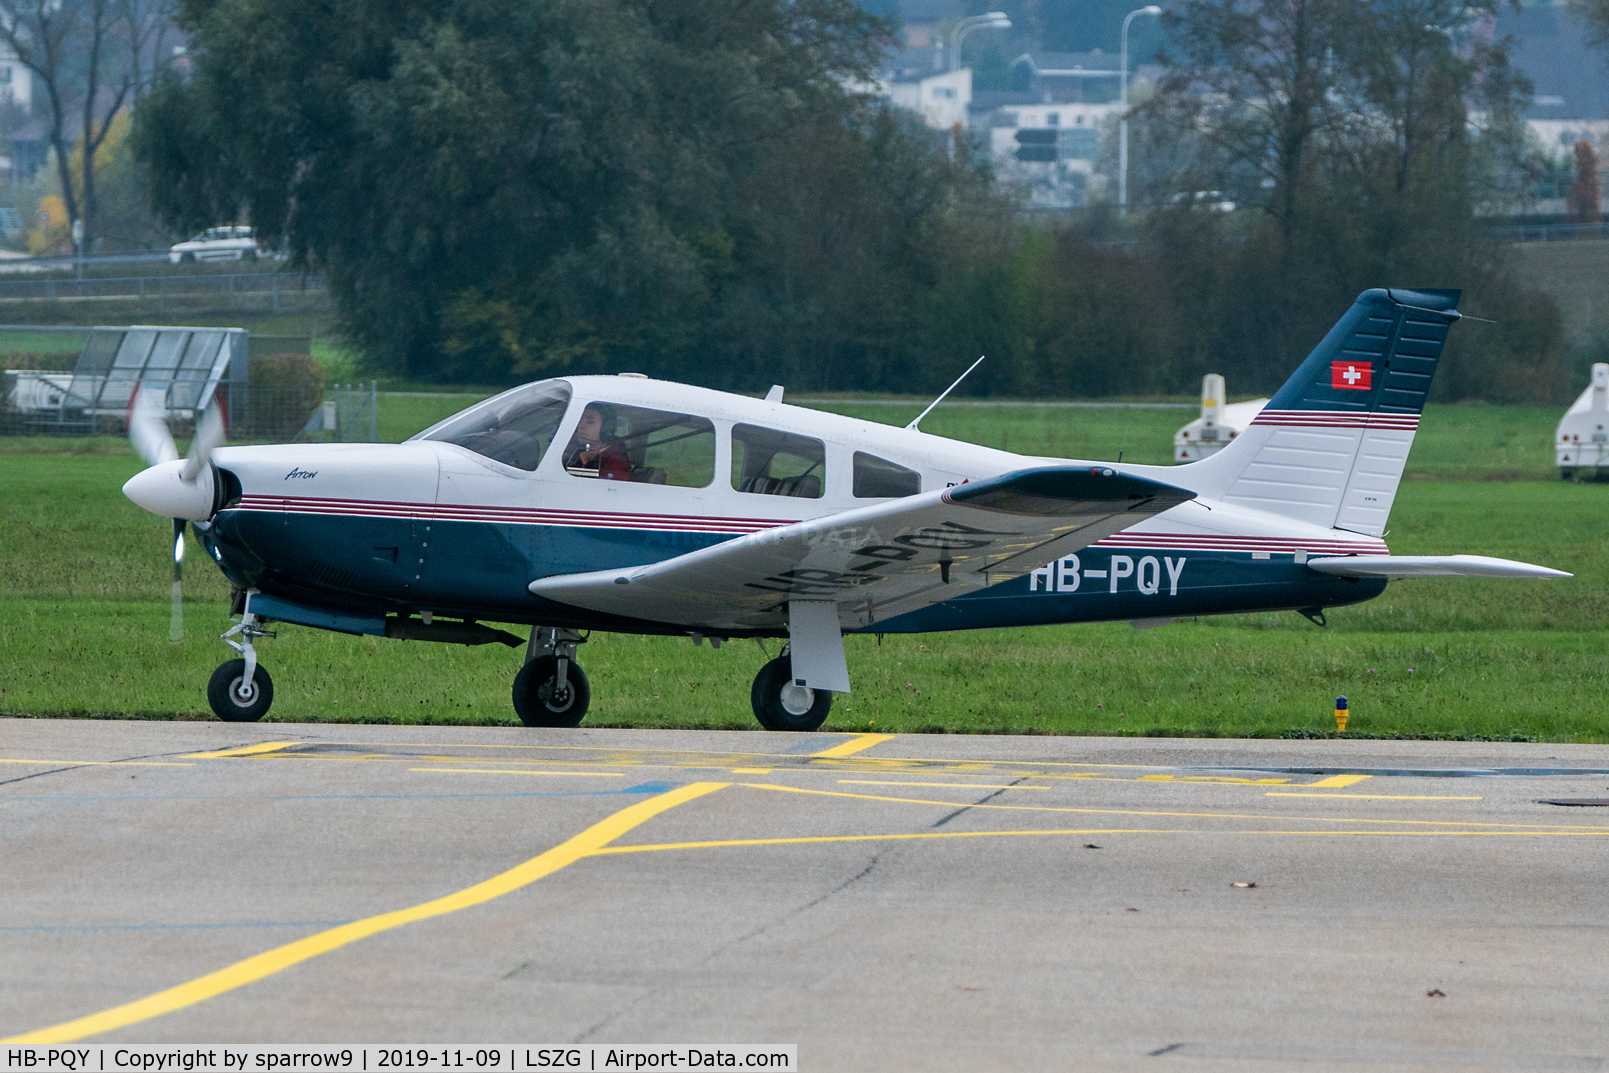 HB-PQY, 2005 Piper PA-28R-201 Cherokee Arrow III C/N 2844120, At Grenchen. HB-registered since 2006-12-28